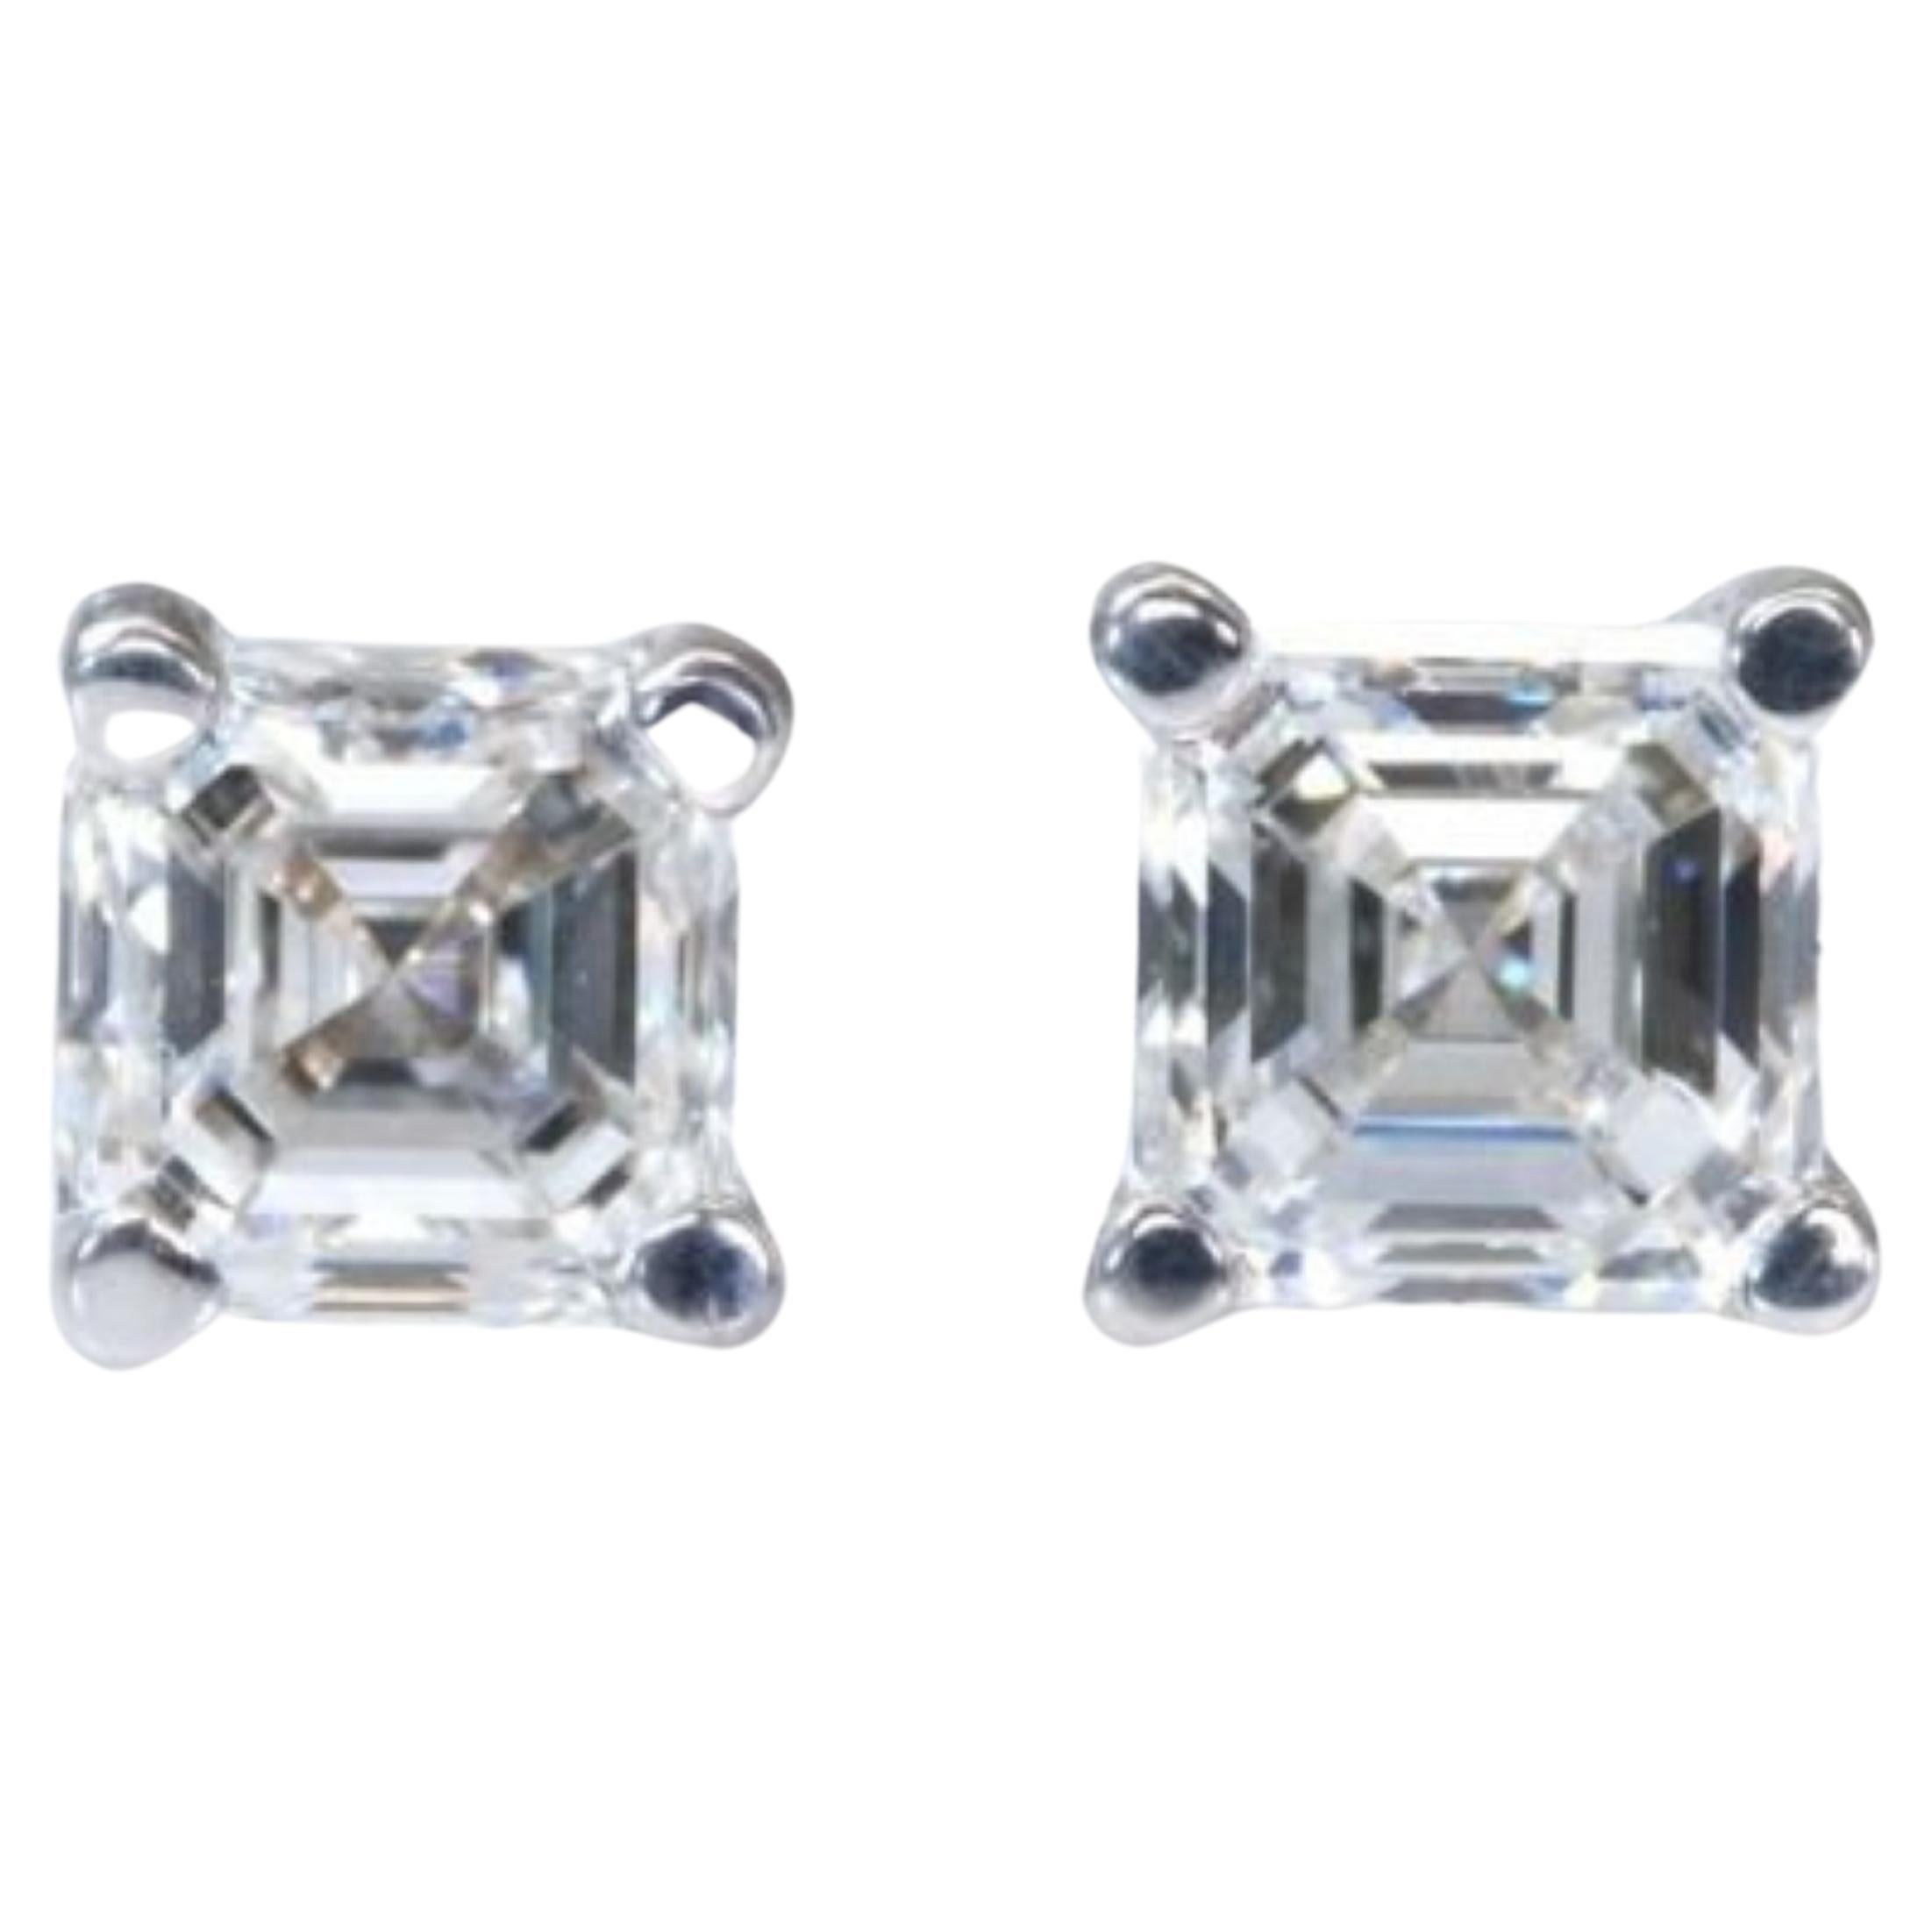 Classic 18k  White Gold Stud Earrings with 1.41 ct. Asccher Cut Natural Diamond For Sale